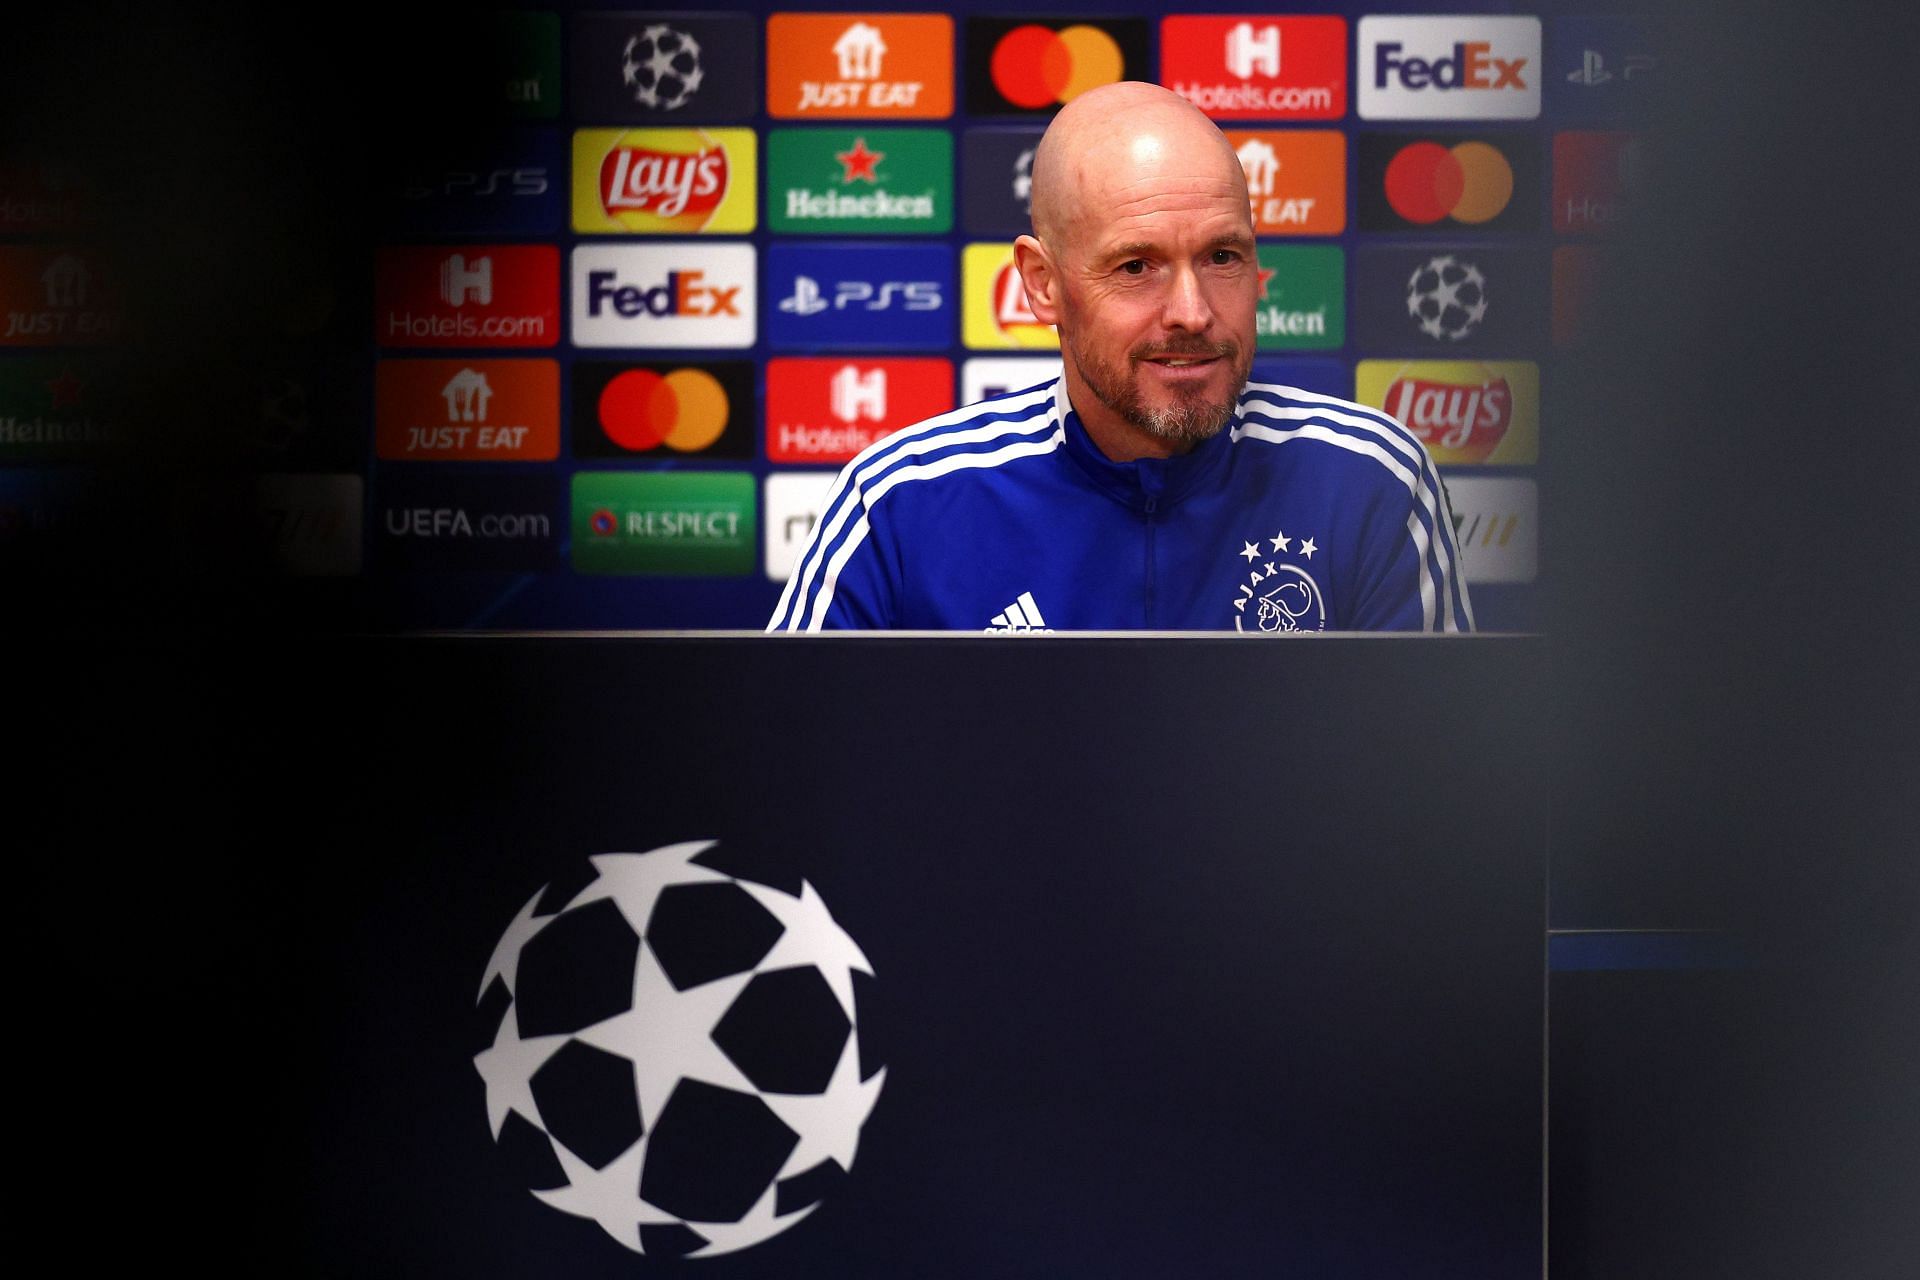 Erik Ten Hag is among the frontrunners for the Manchester United job.